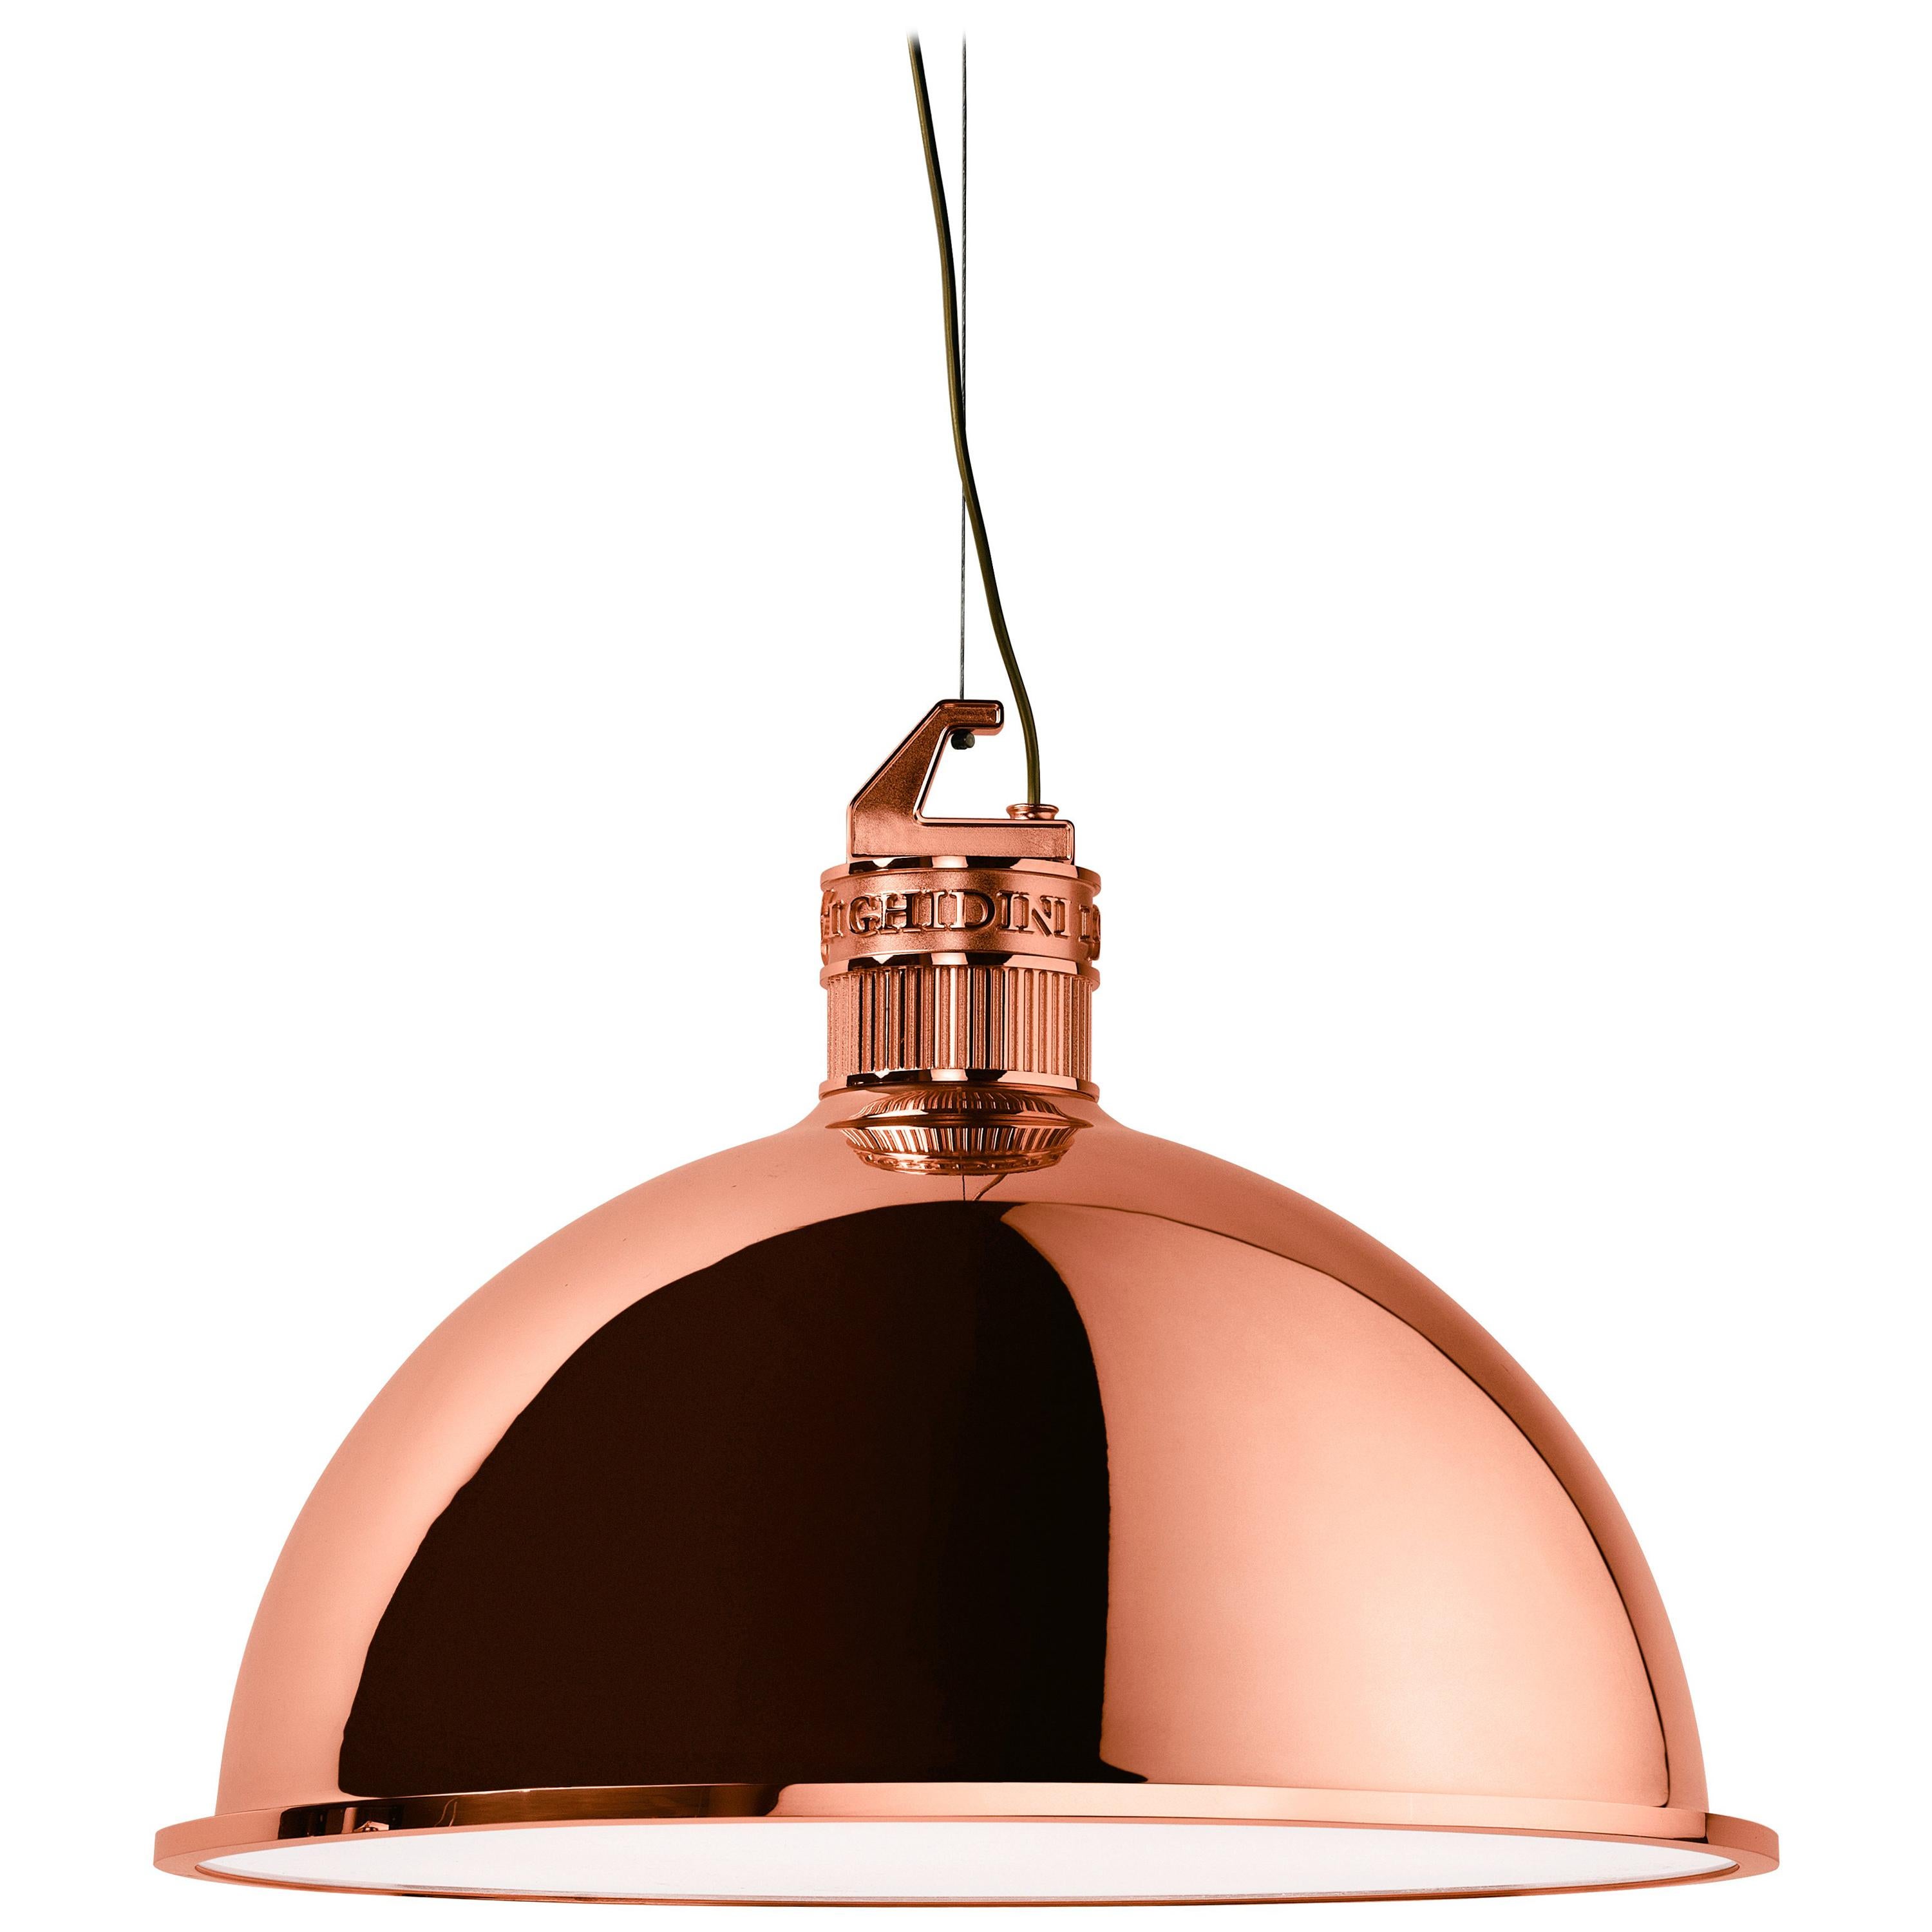 Ghidini 1961 Factory Large Suspension Light in Copper by Elisa Giovanni